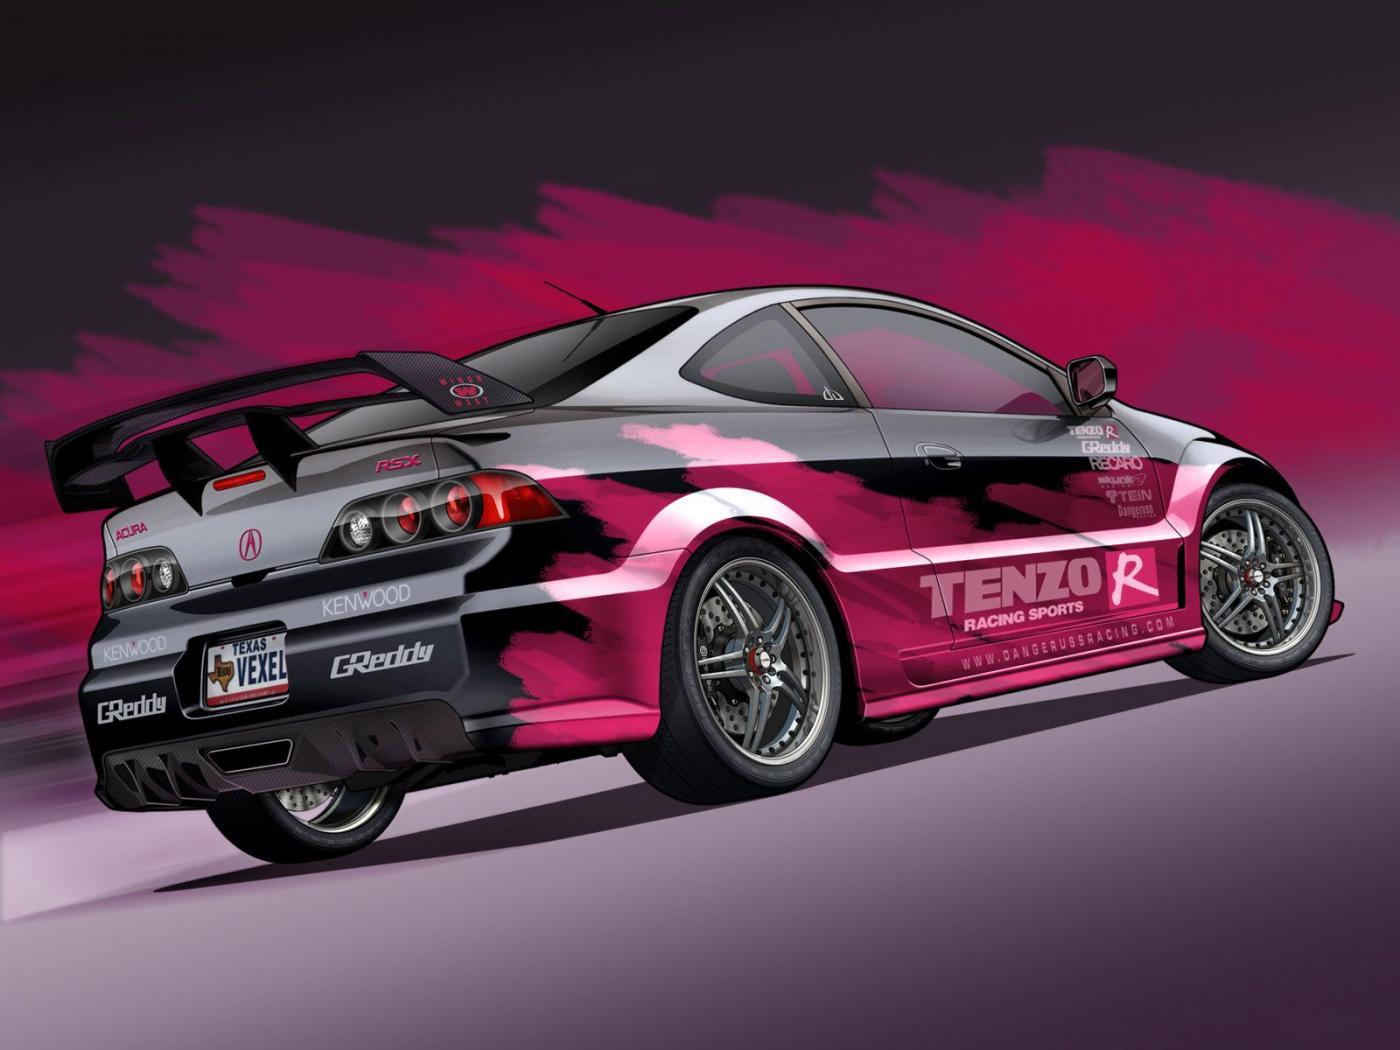 Acura RSX Modified Wallpapers